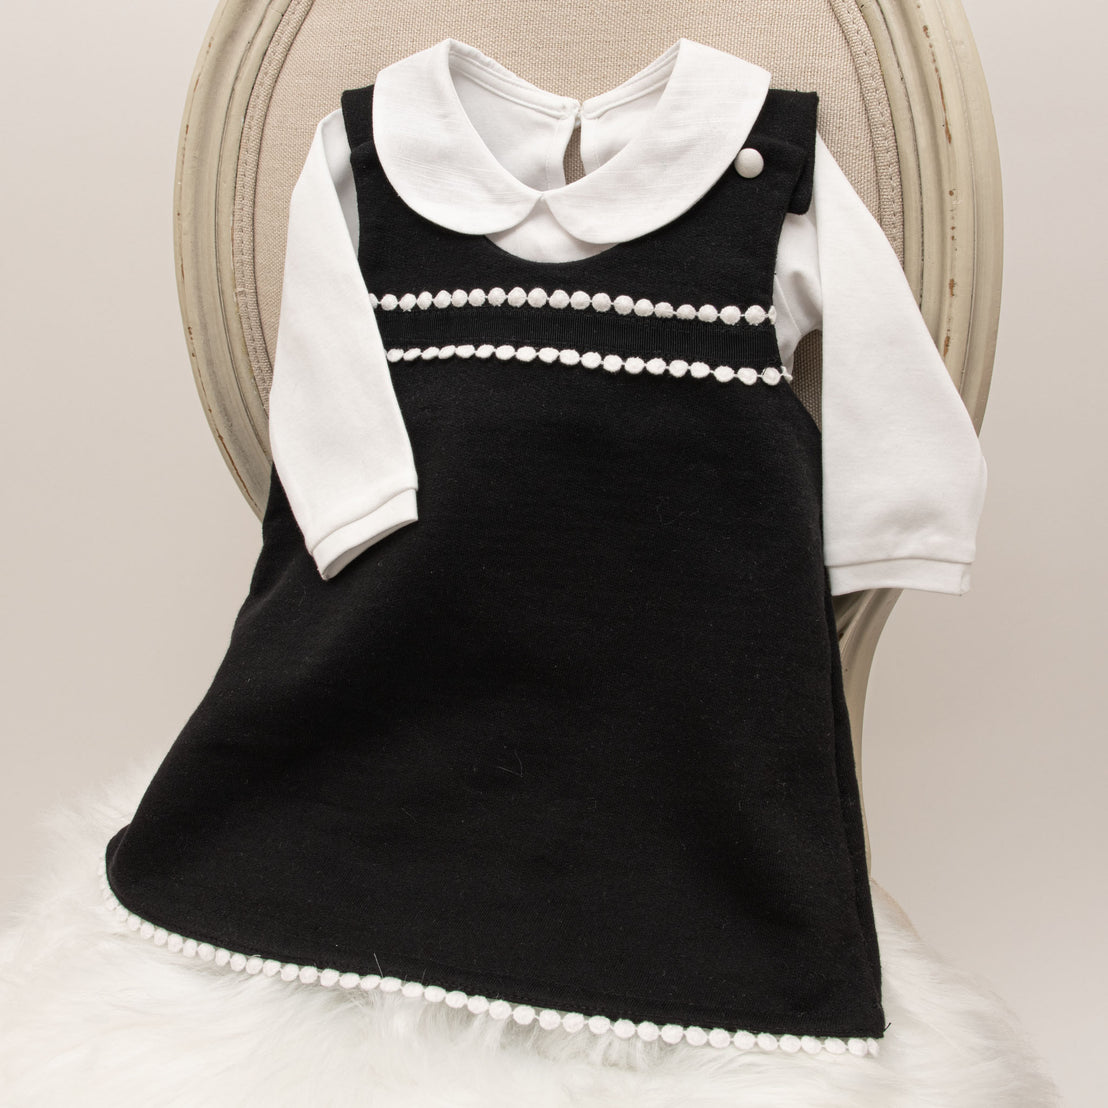 A June Jumper Dress Set with white collar and decorative white pearls displayed on a vintage beige chair with white furry material underneath.